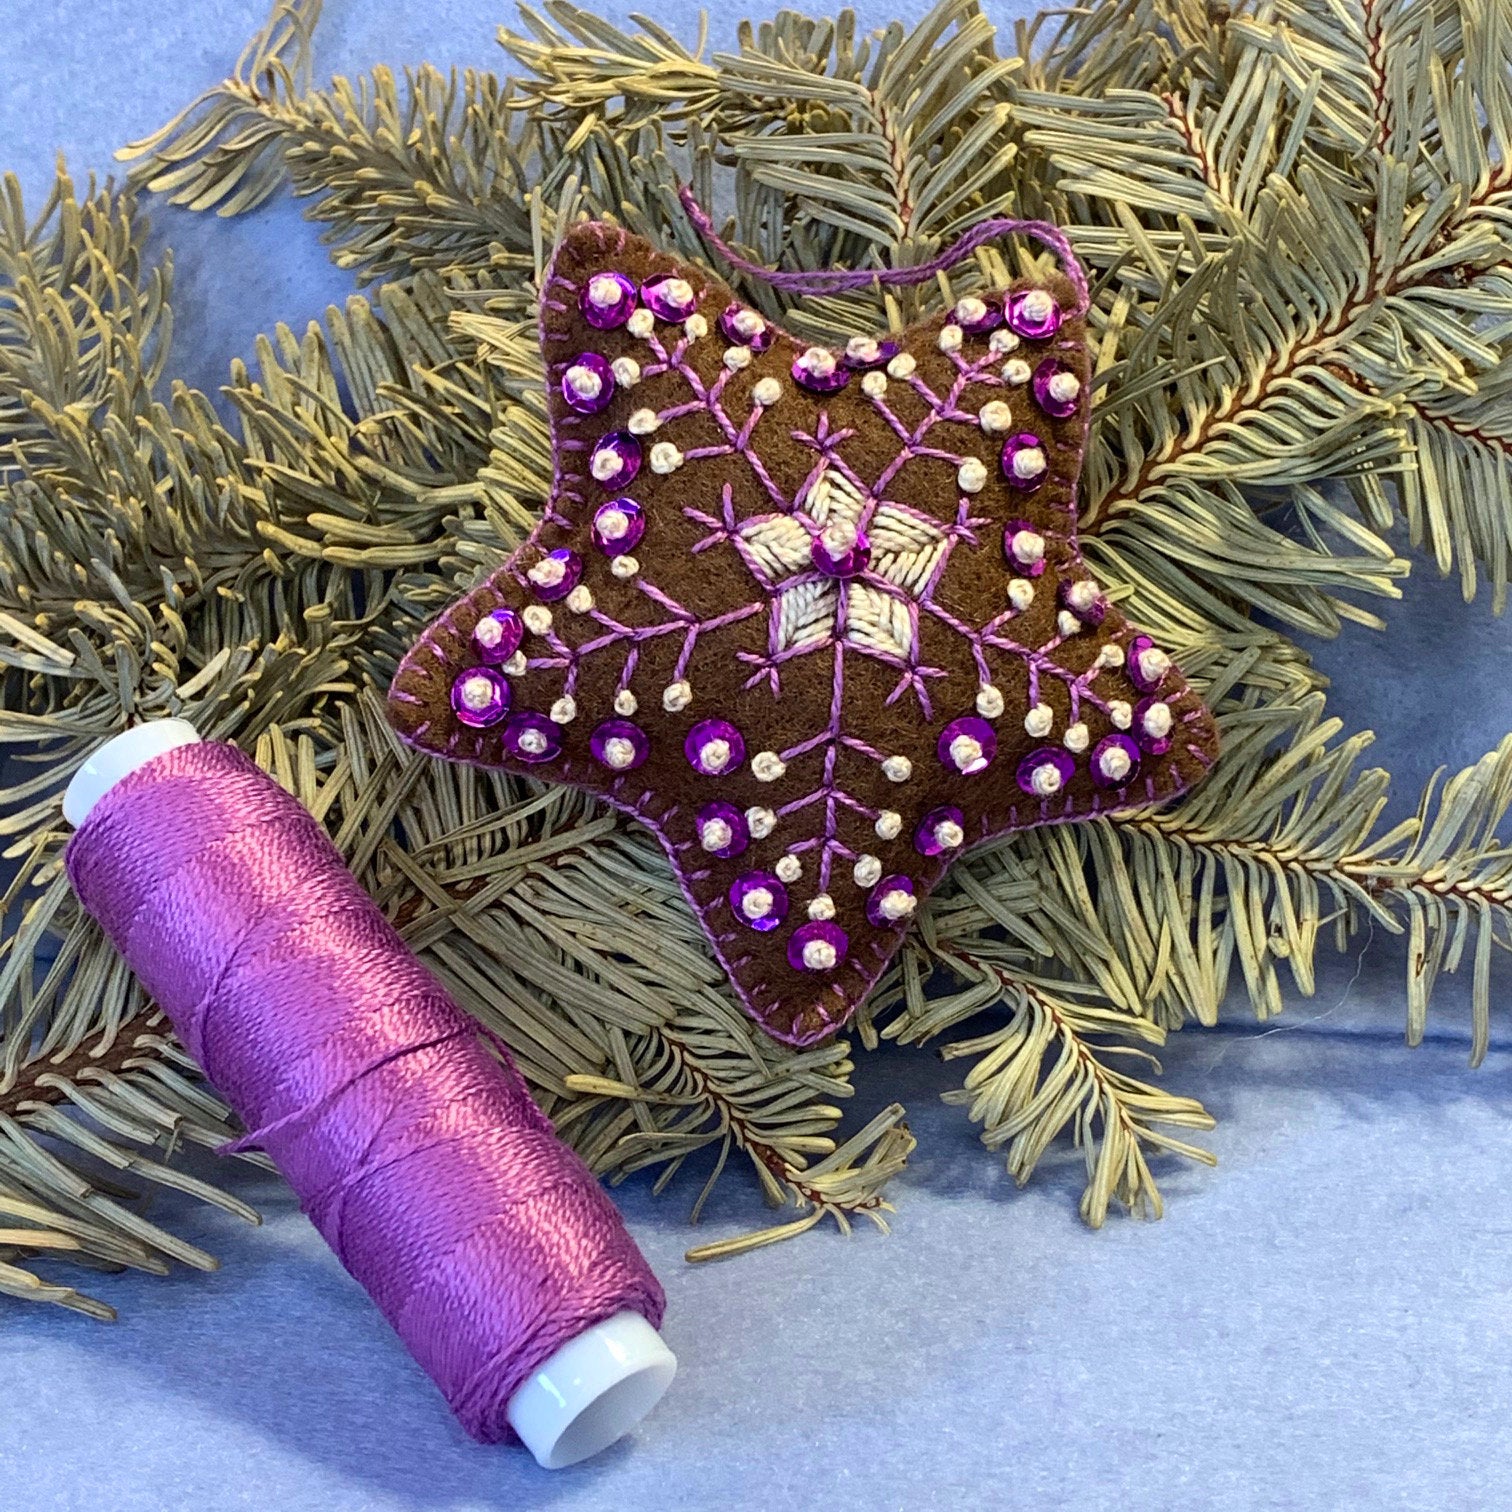 Felt Embroidered Star Ornament With Sequin-Ornament Exchange Gift